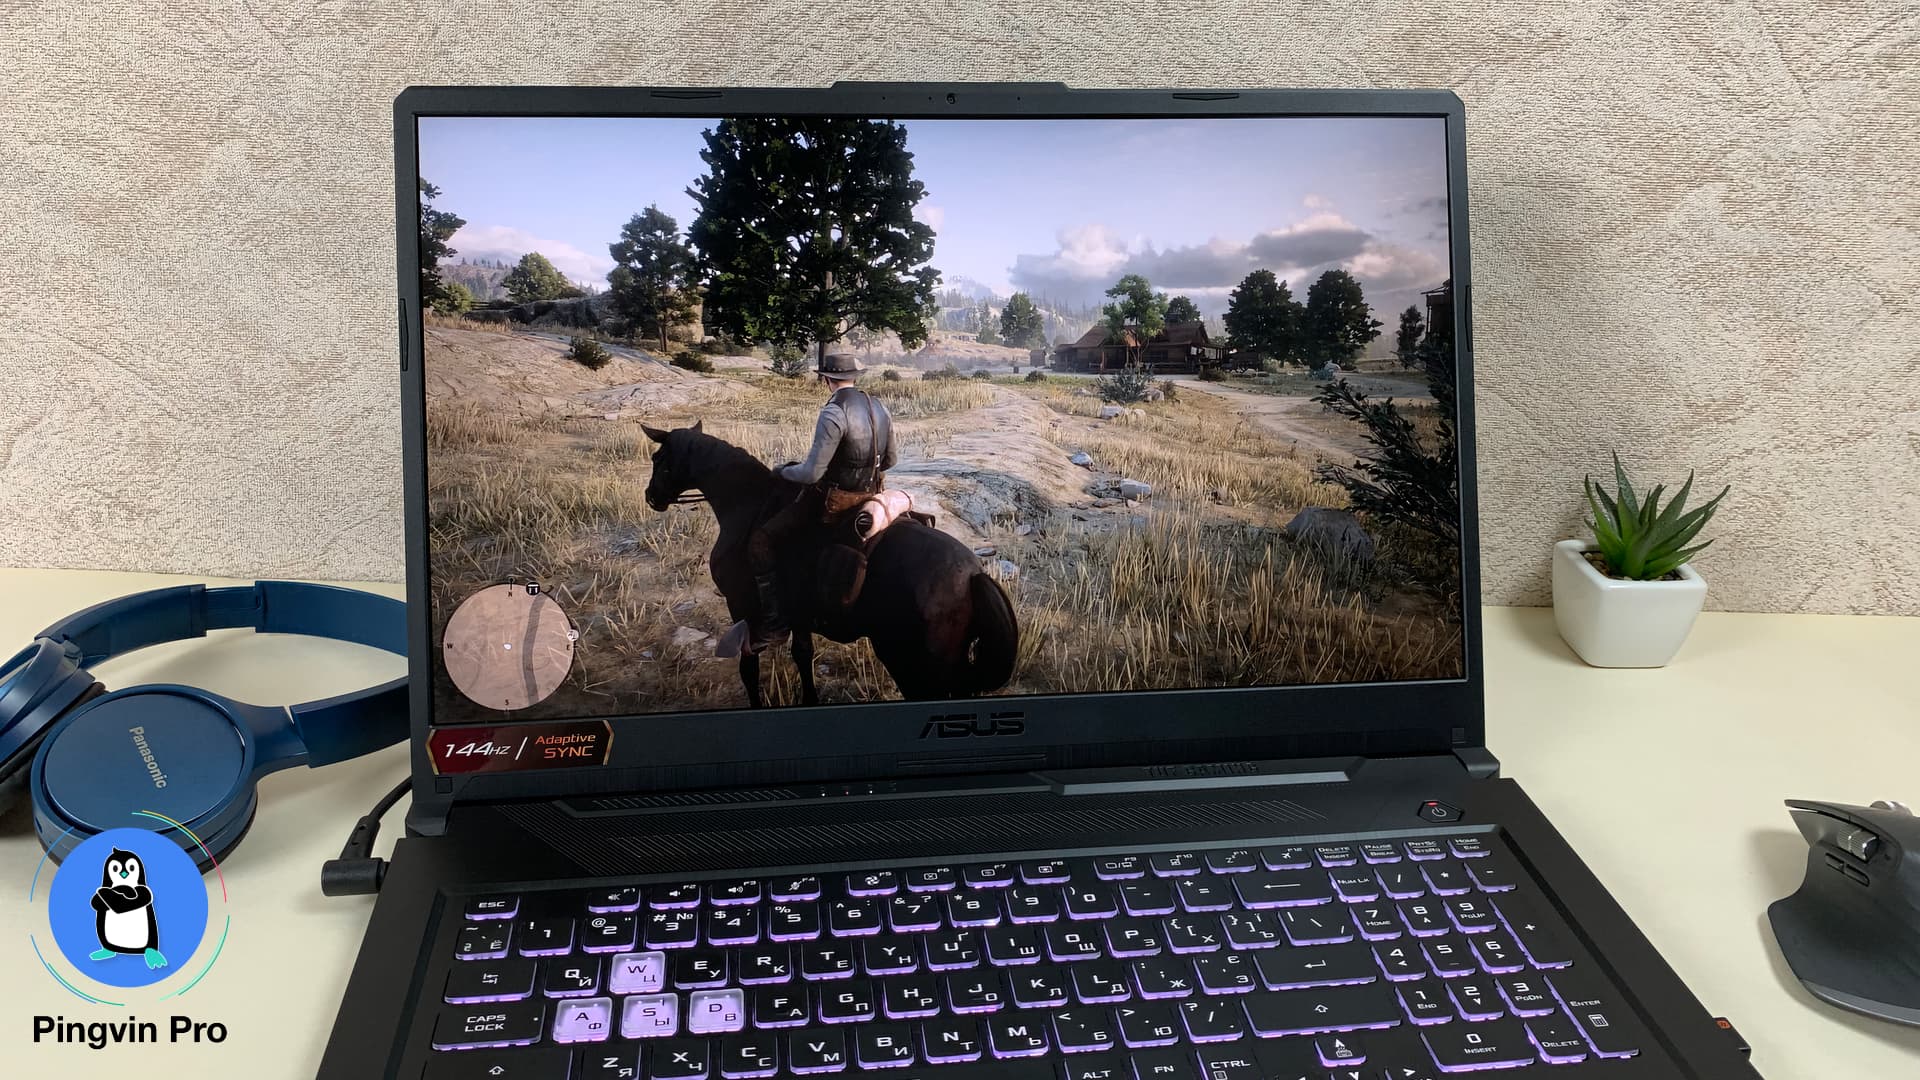 ASUS TUF Gaming F17 (FX706HM) | (Red Dead Redemption 2)